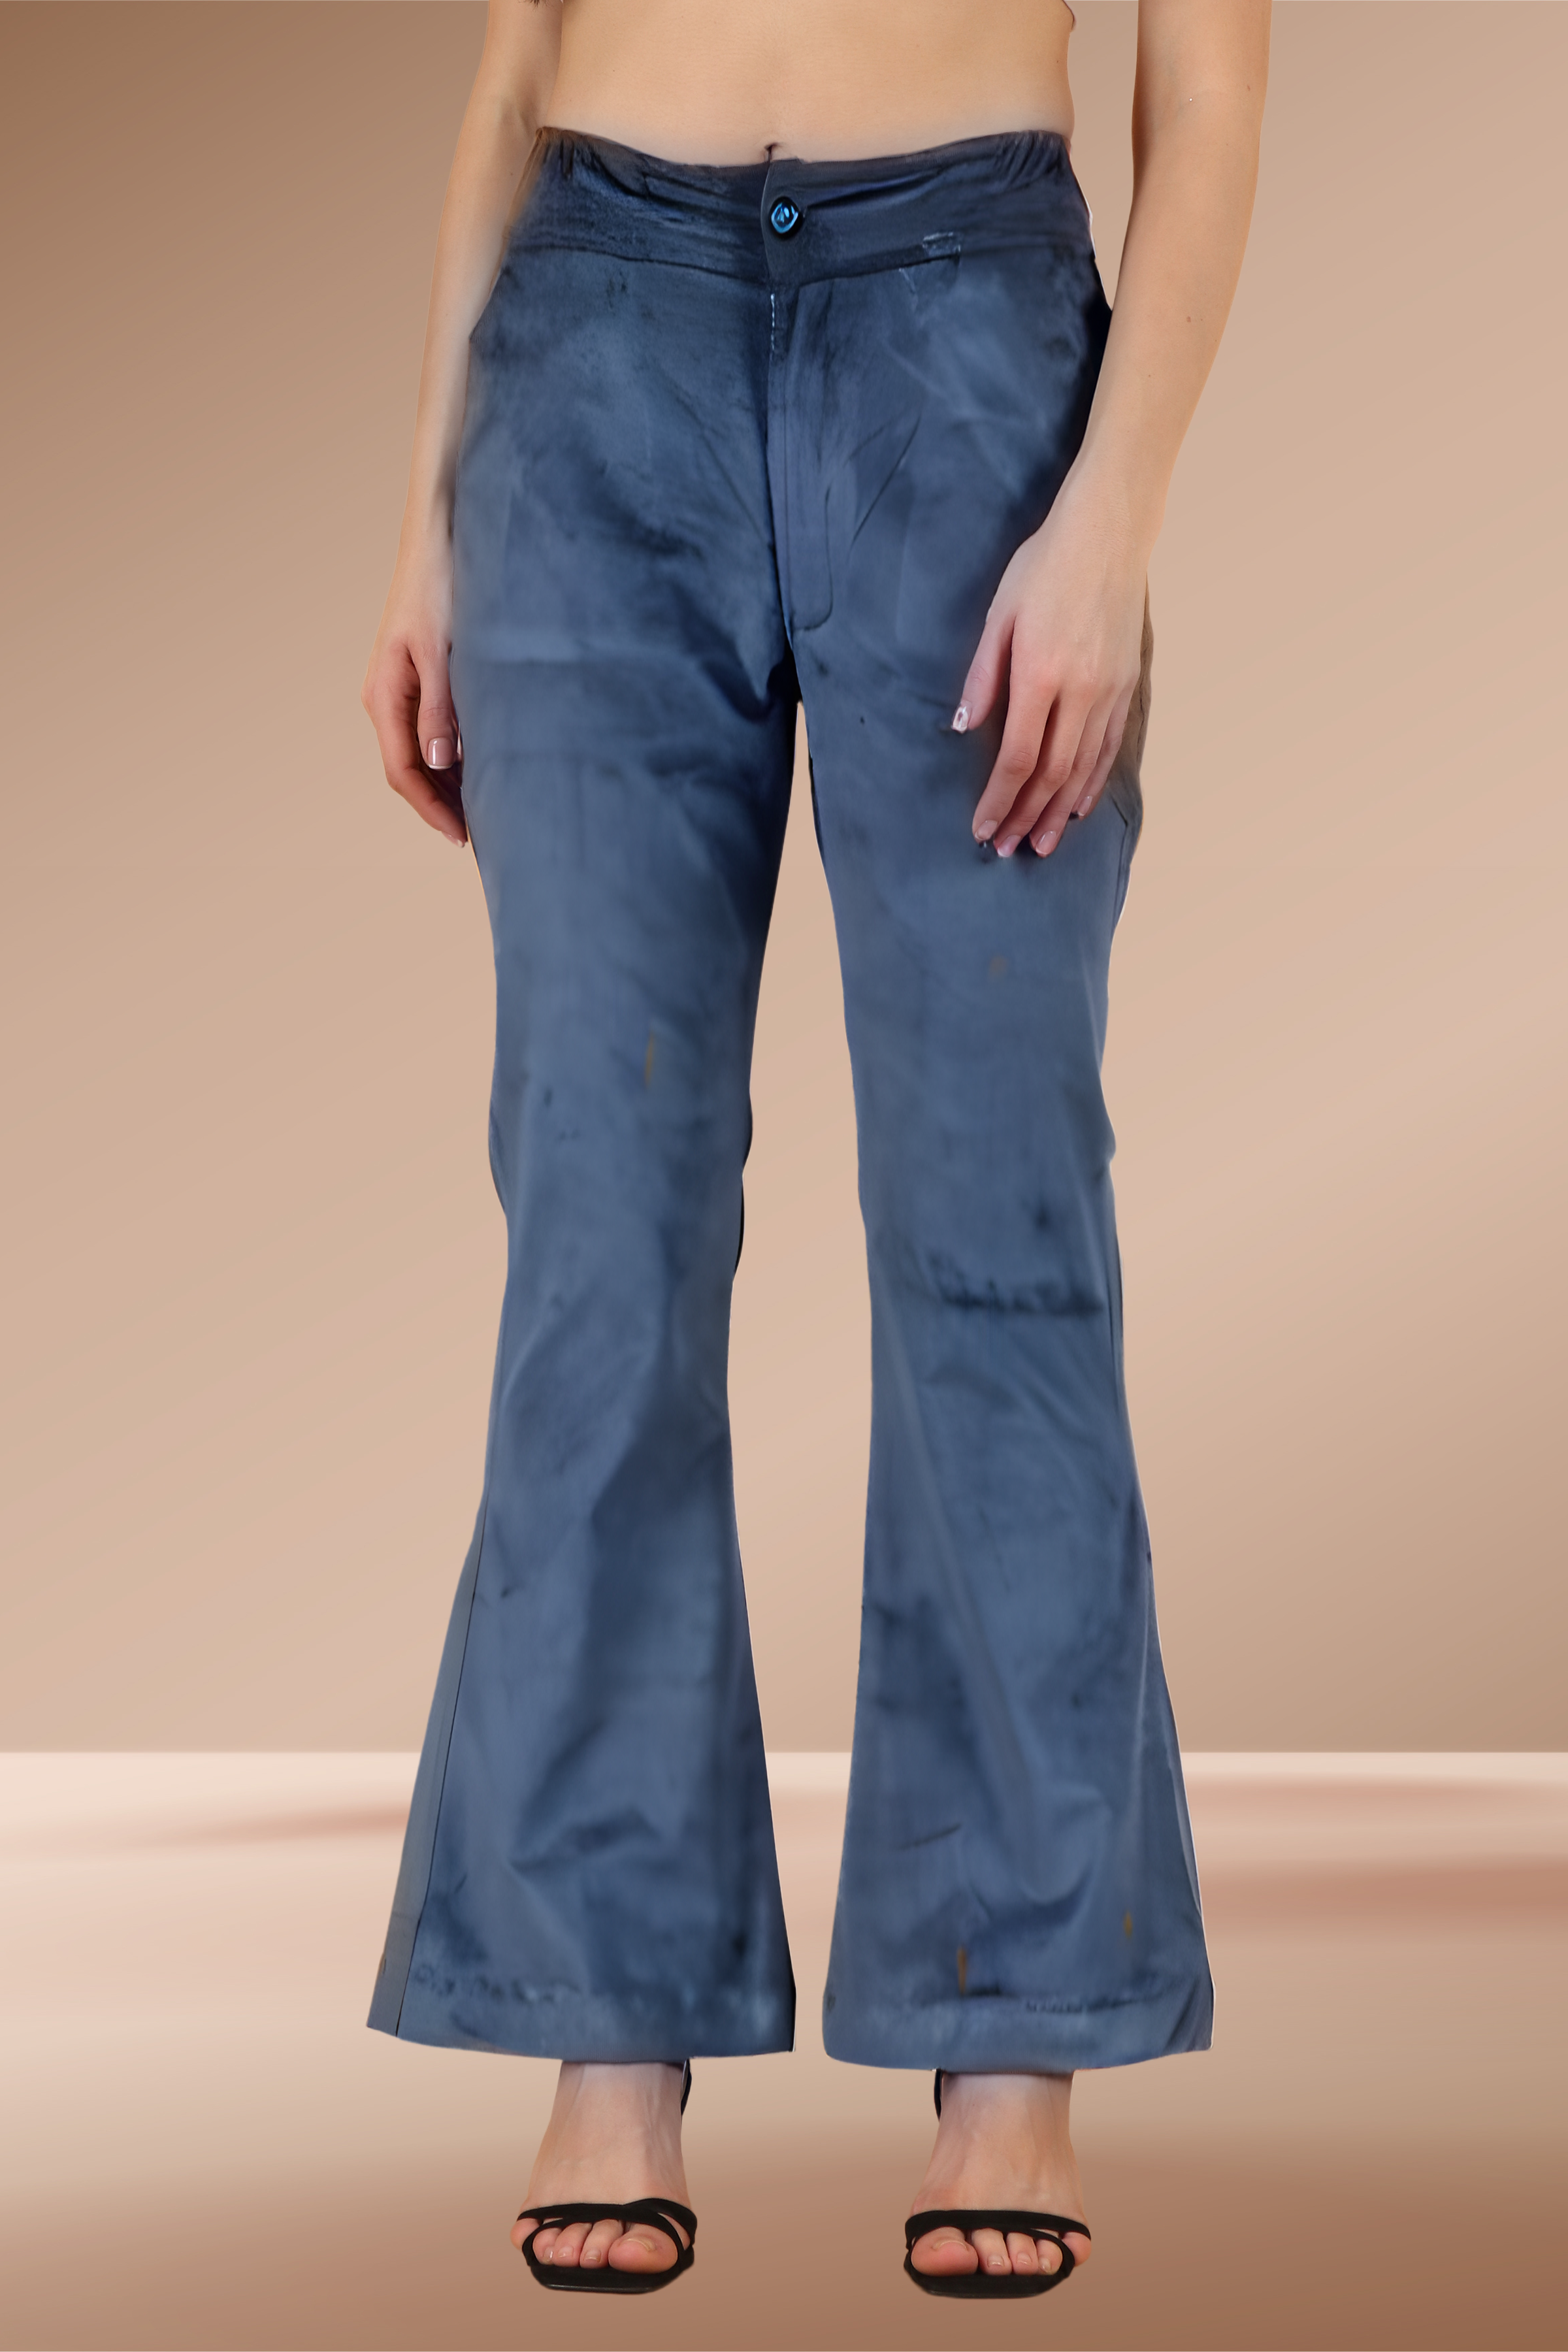 How To Style Bell Bottoms - an indigo day - Affordable Style Blog